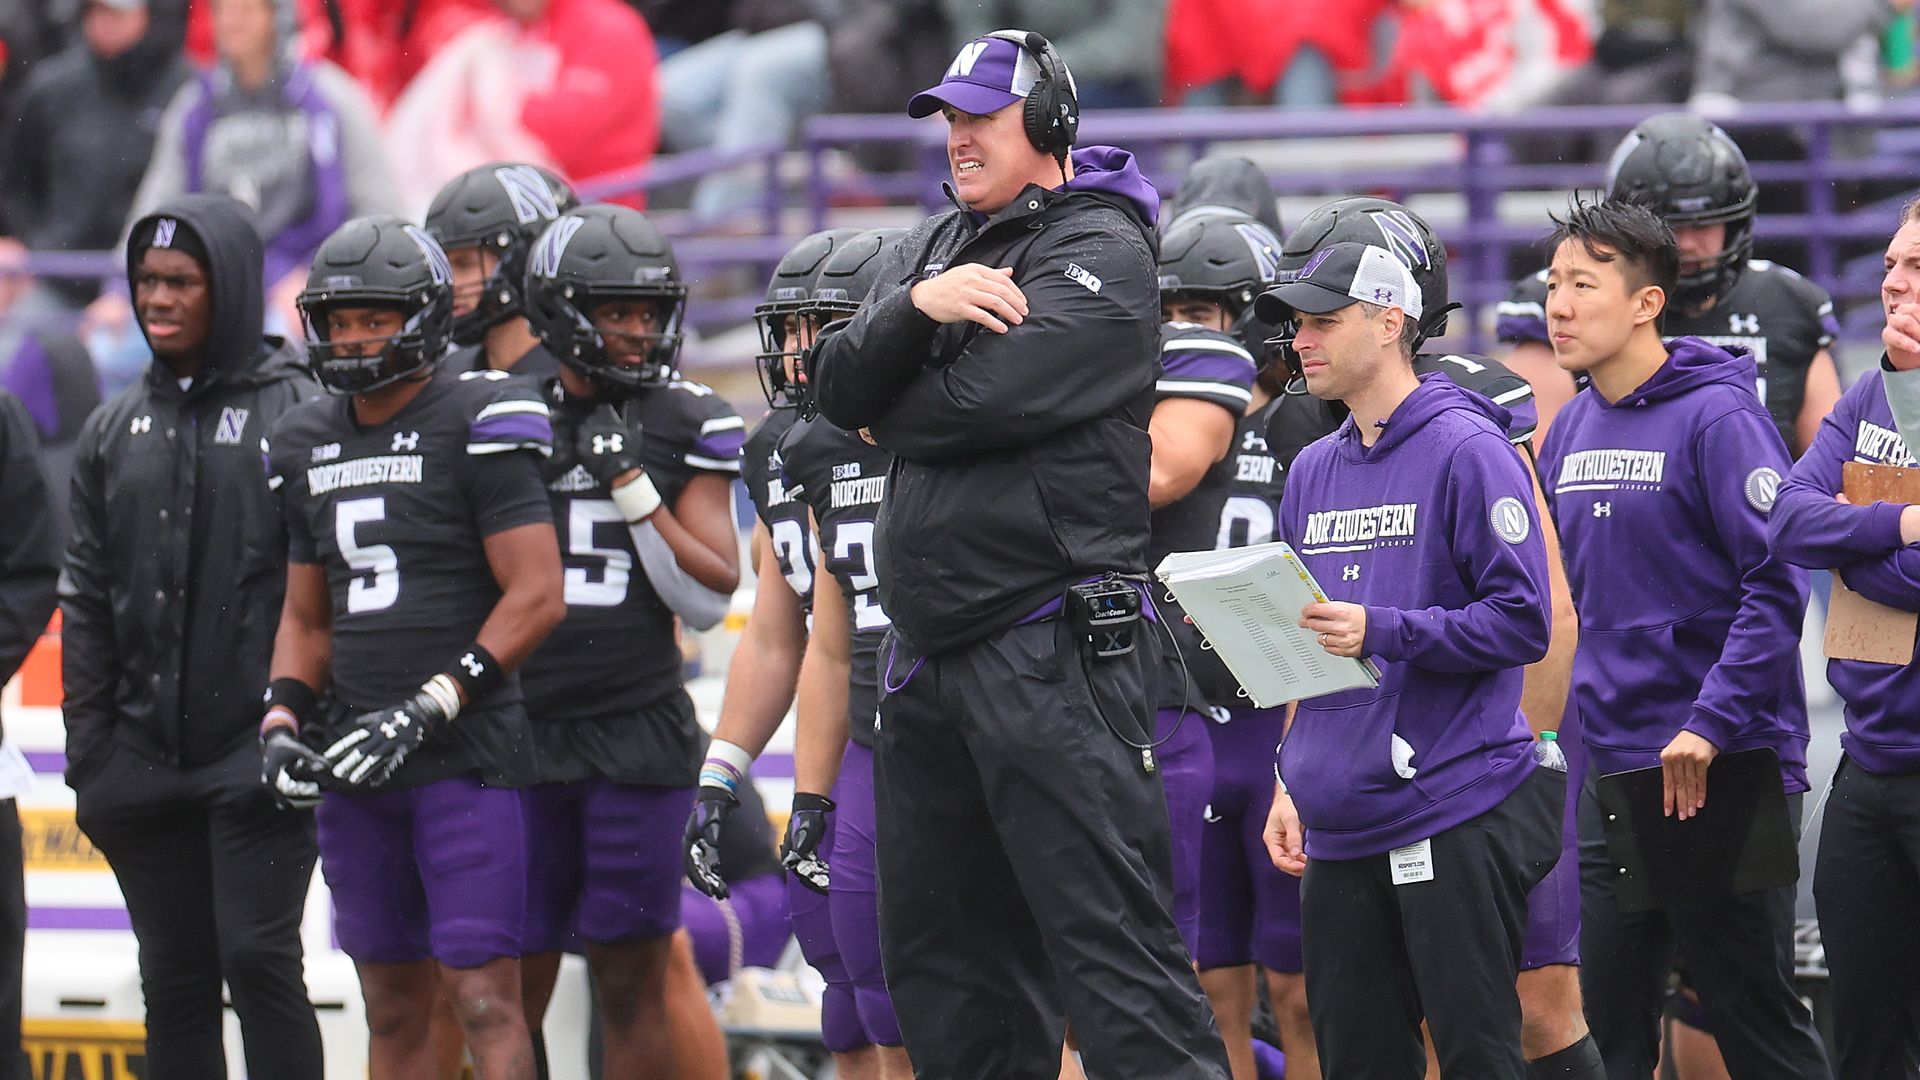 Head coach Pat Fitzgerald of the Northwestern Wildcats reacts against the Ohio State Buckeyes 